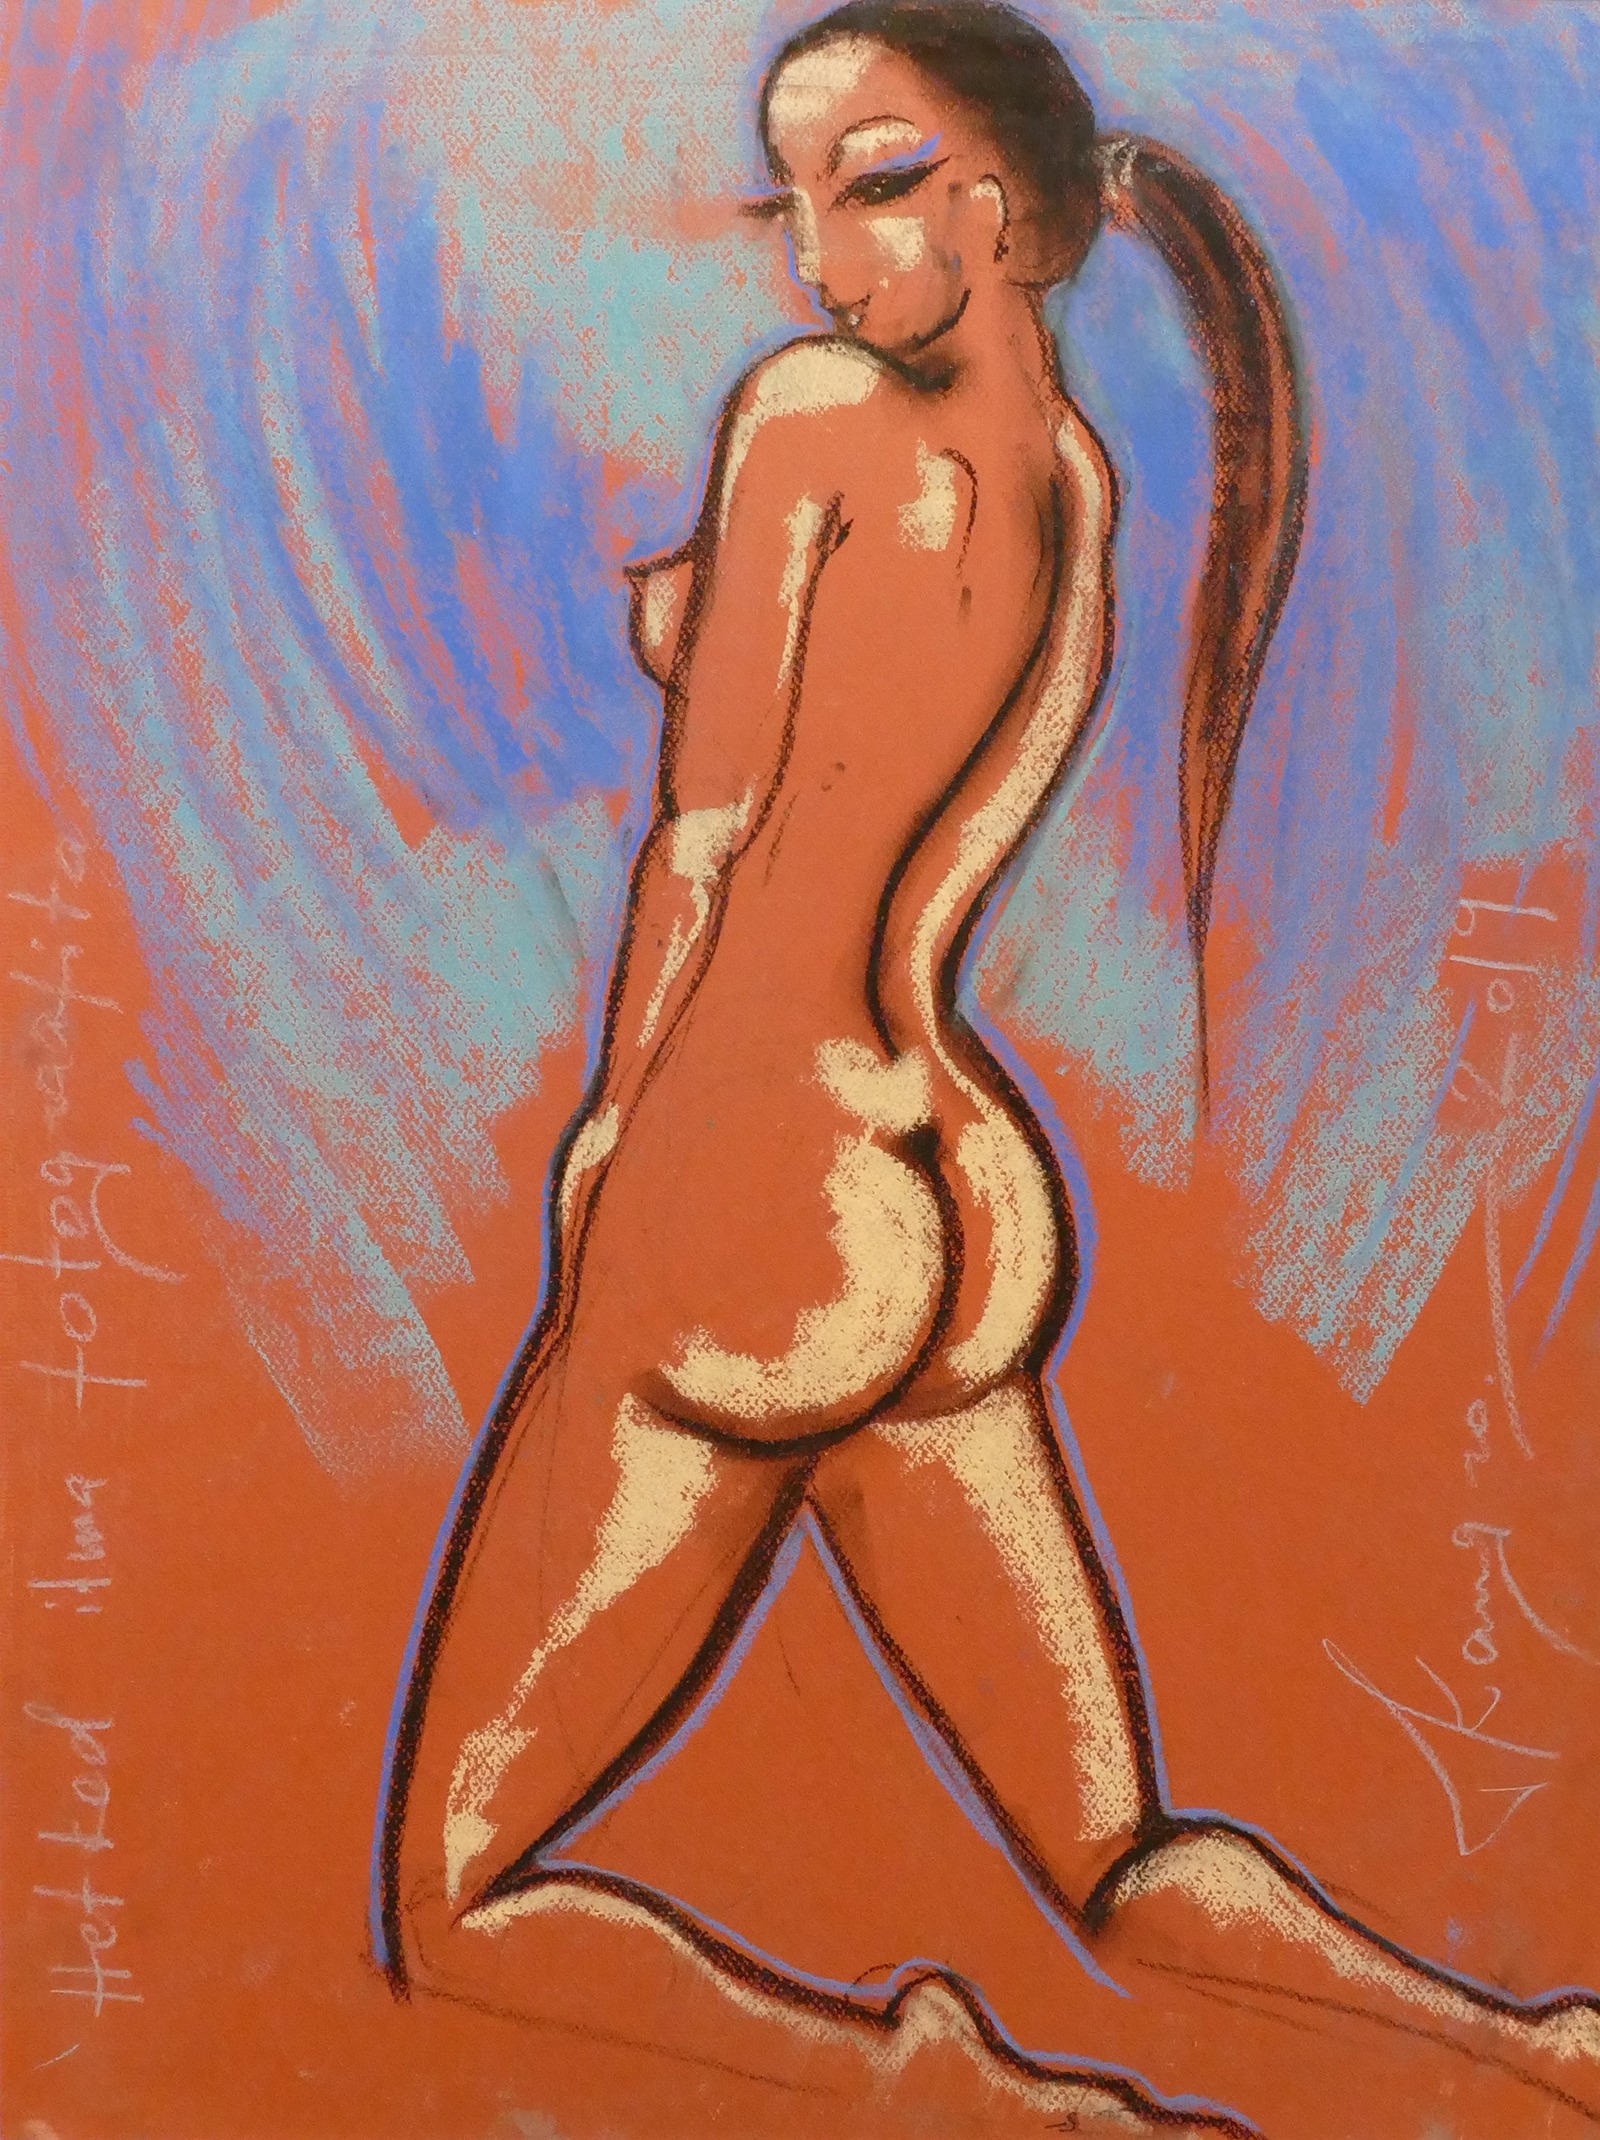 Naked woman painting